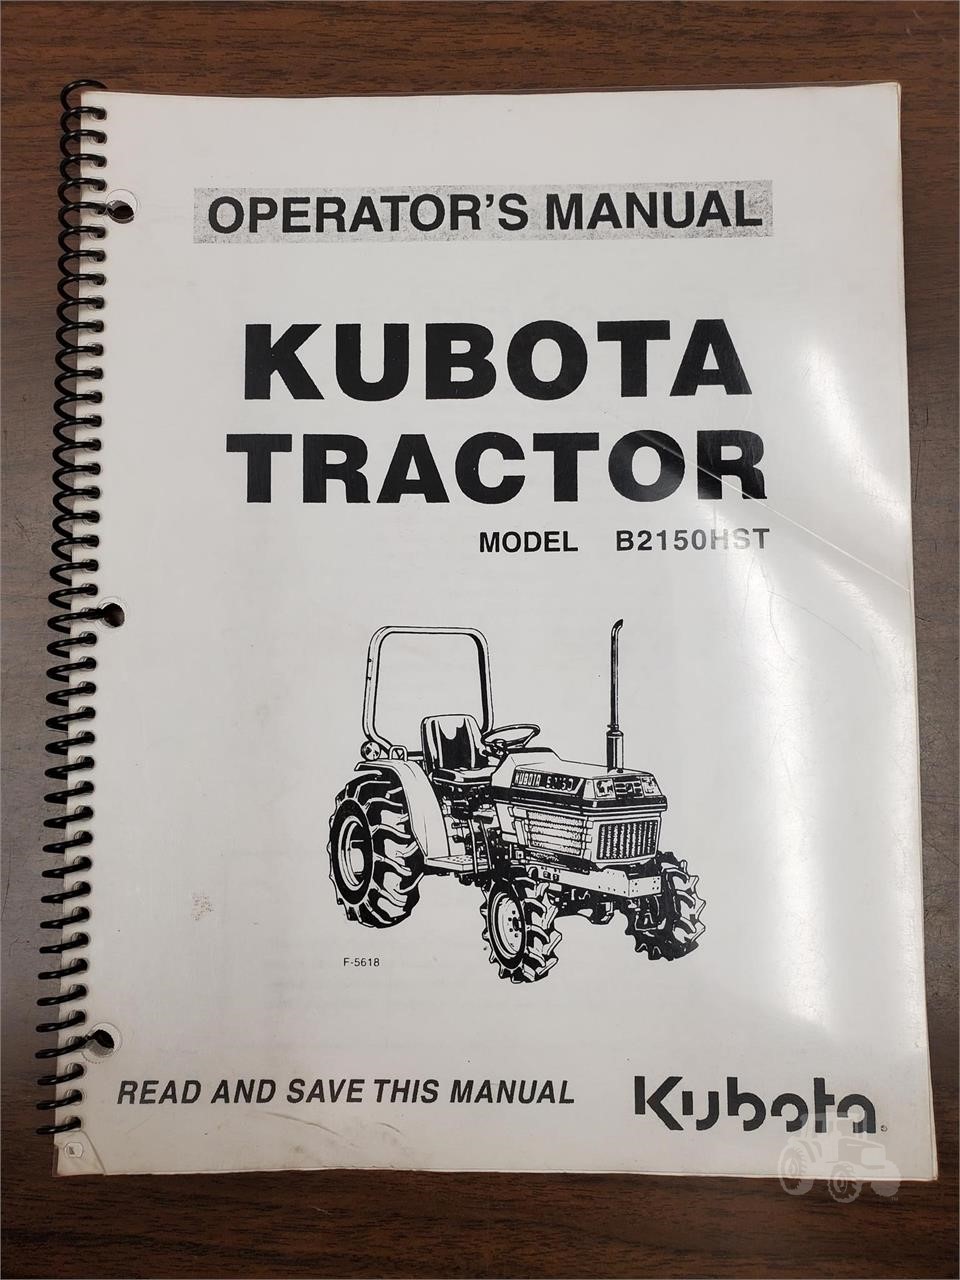 KUBOTA For Sale - 1 Listings | TractorHouse.com - Page 1 of 1